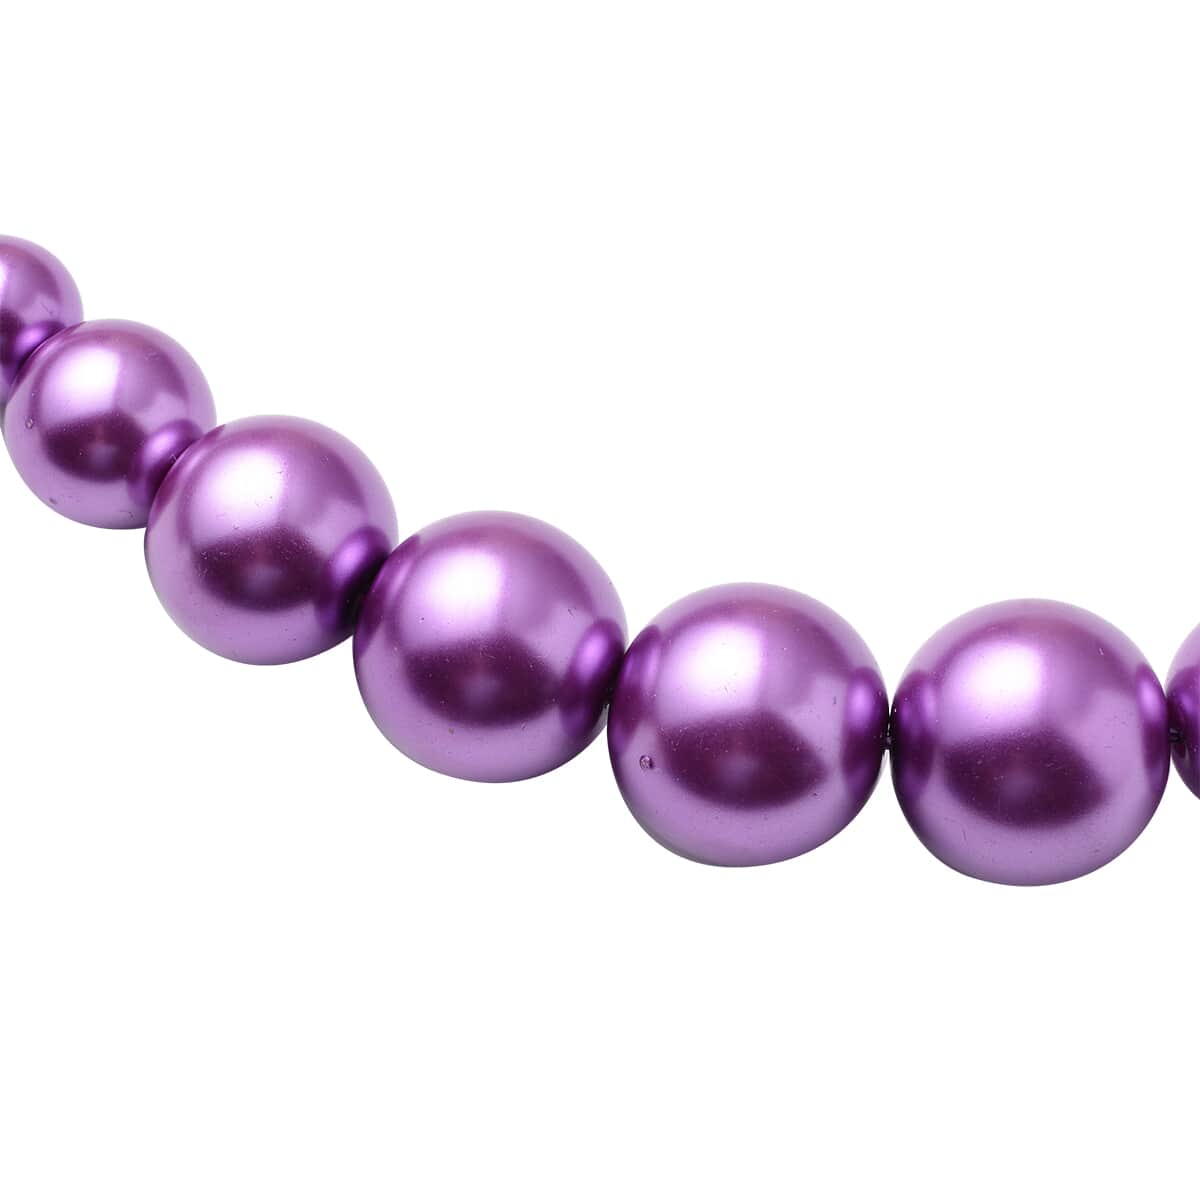 Set of 2 Simulated Purple Pearl Necklace 20-22 Inches and Earrings in Silvertone and Stainless Steel image number 3